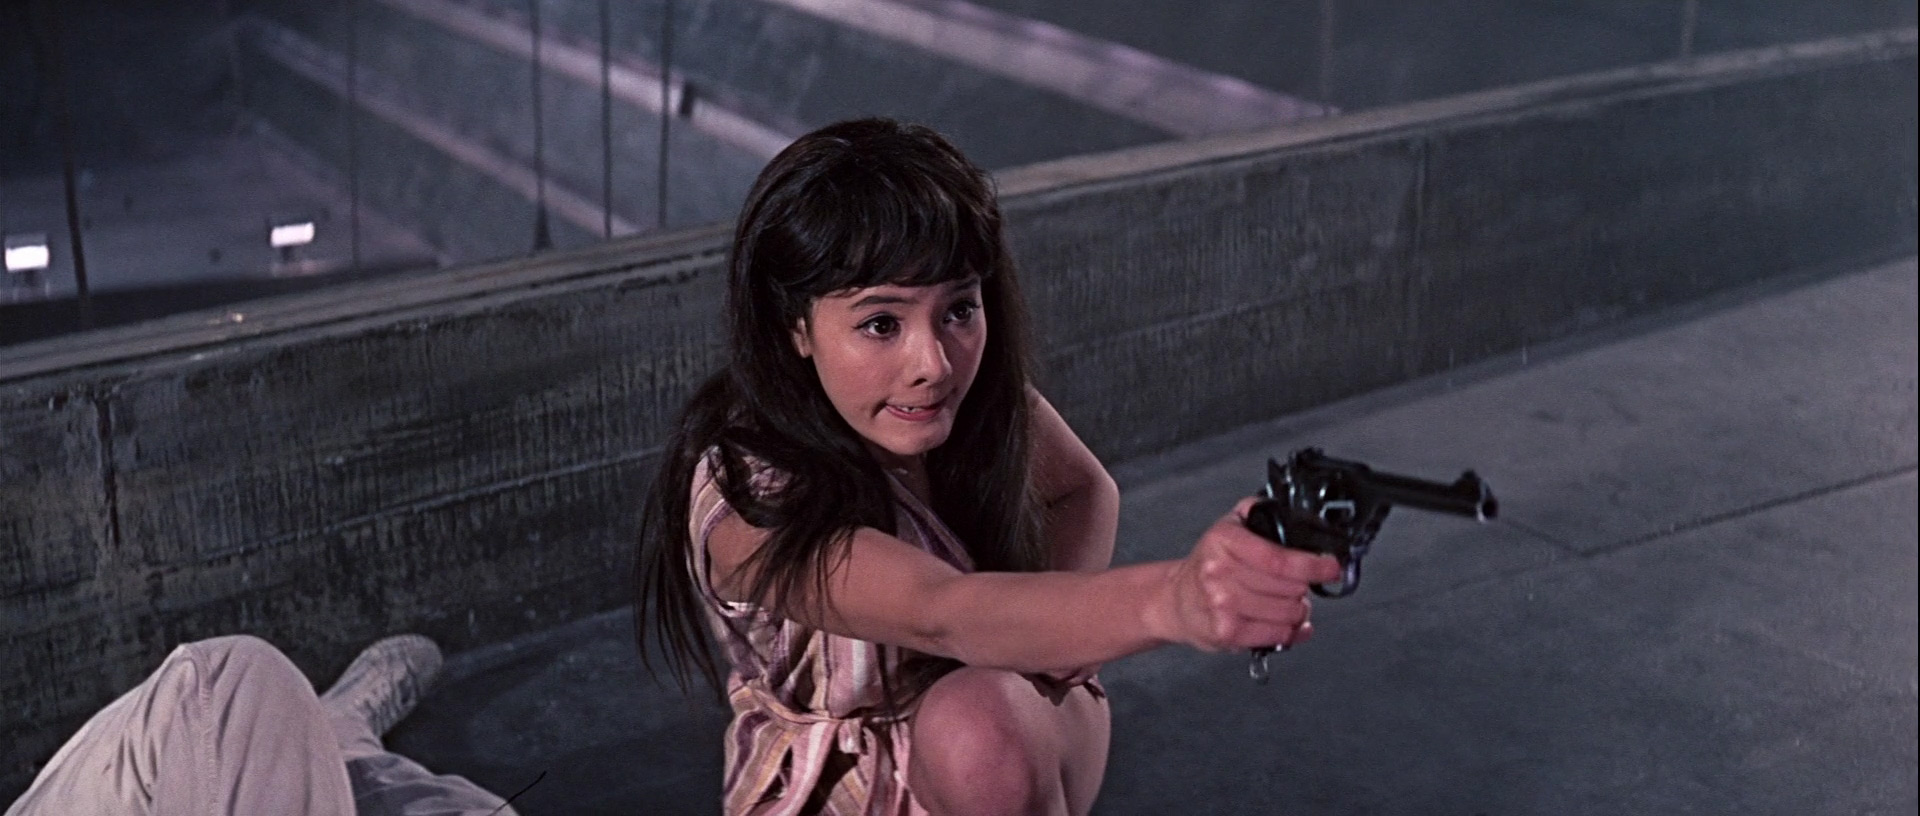 bond girl, gun in You Only Live Twice